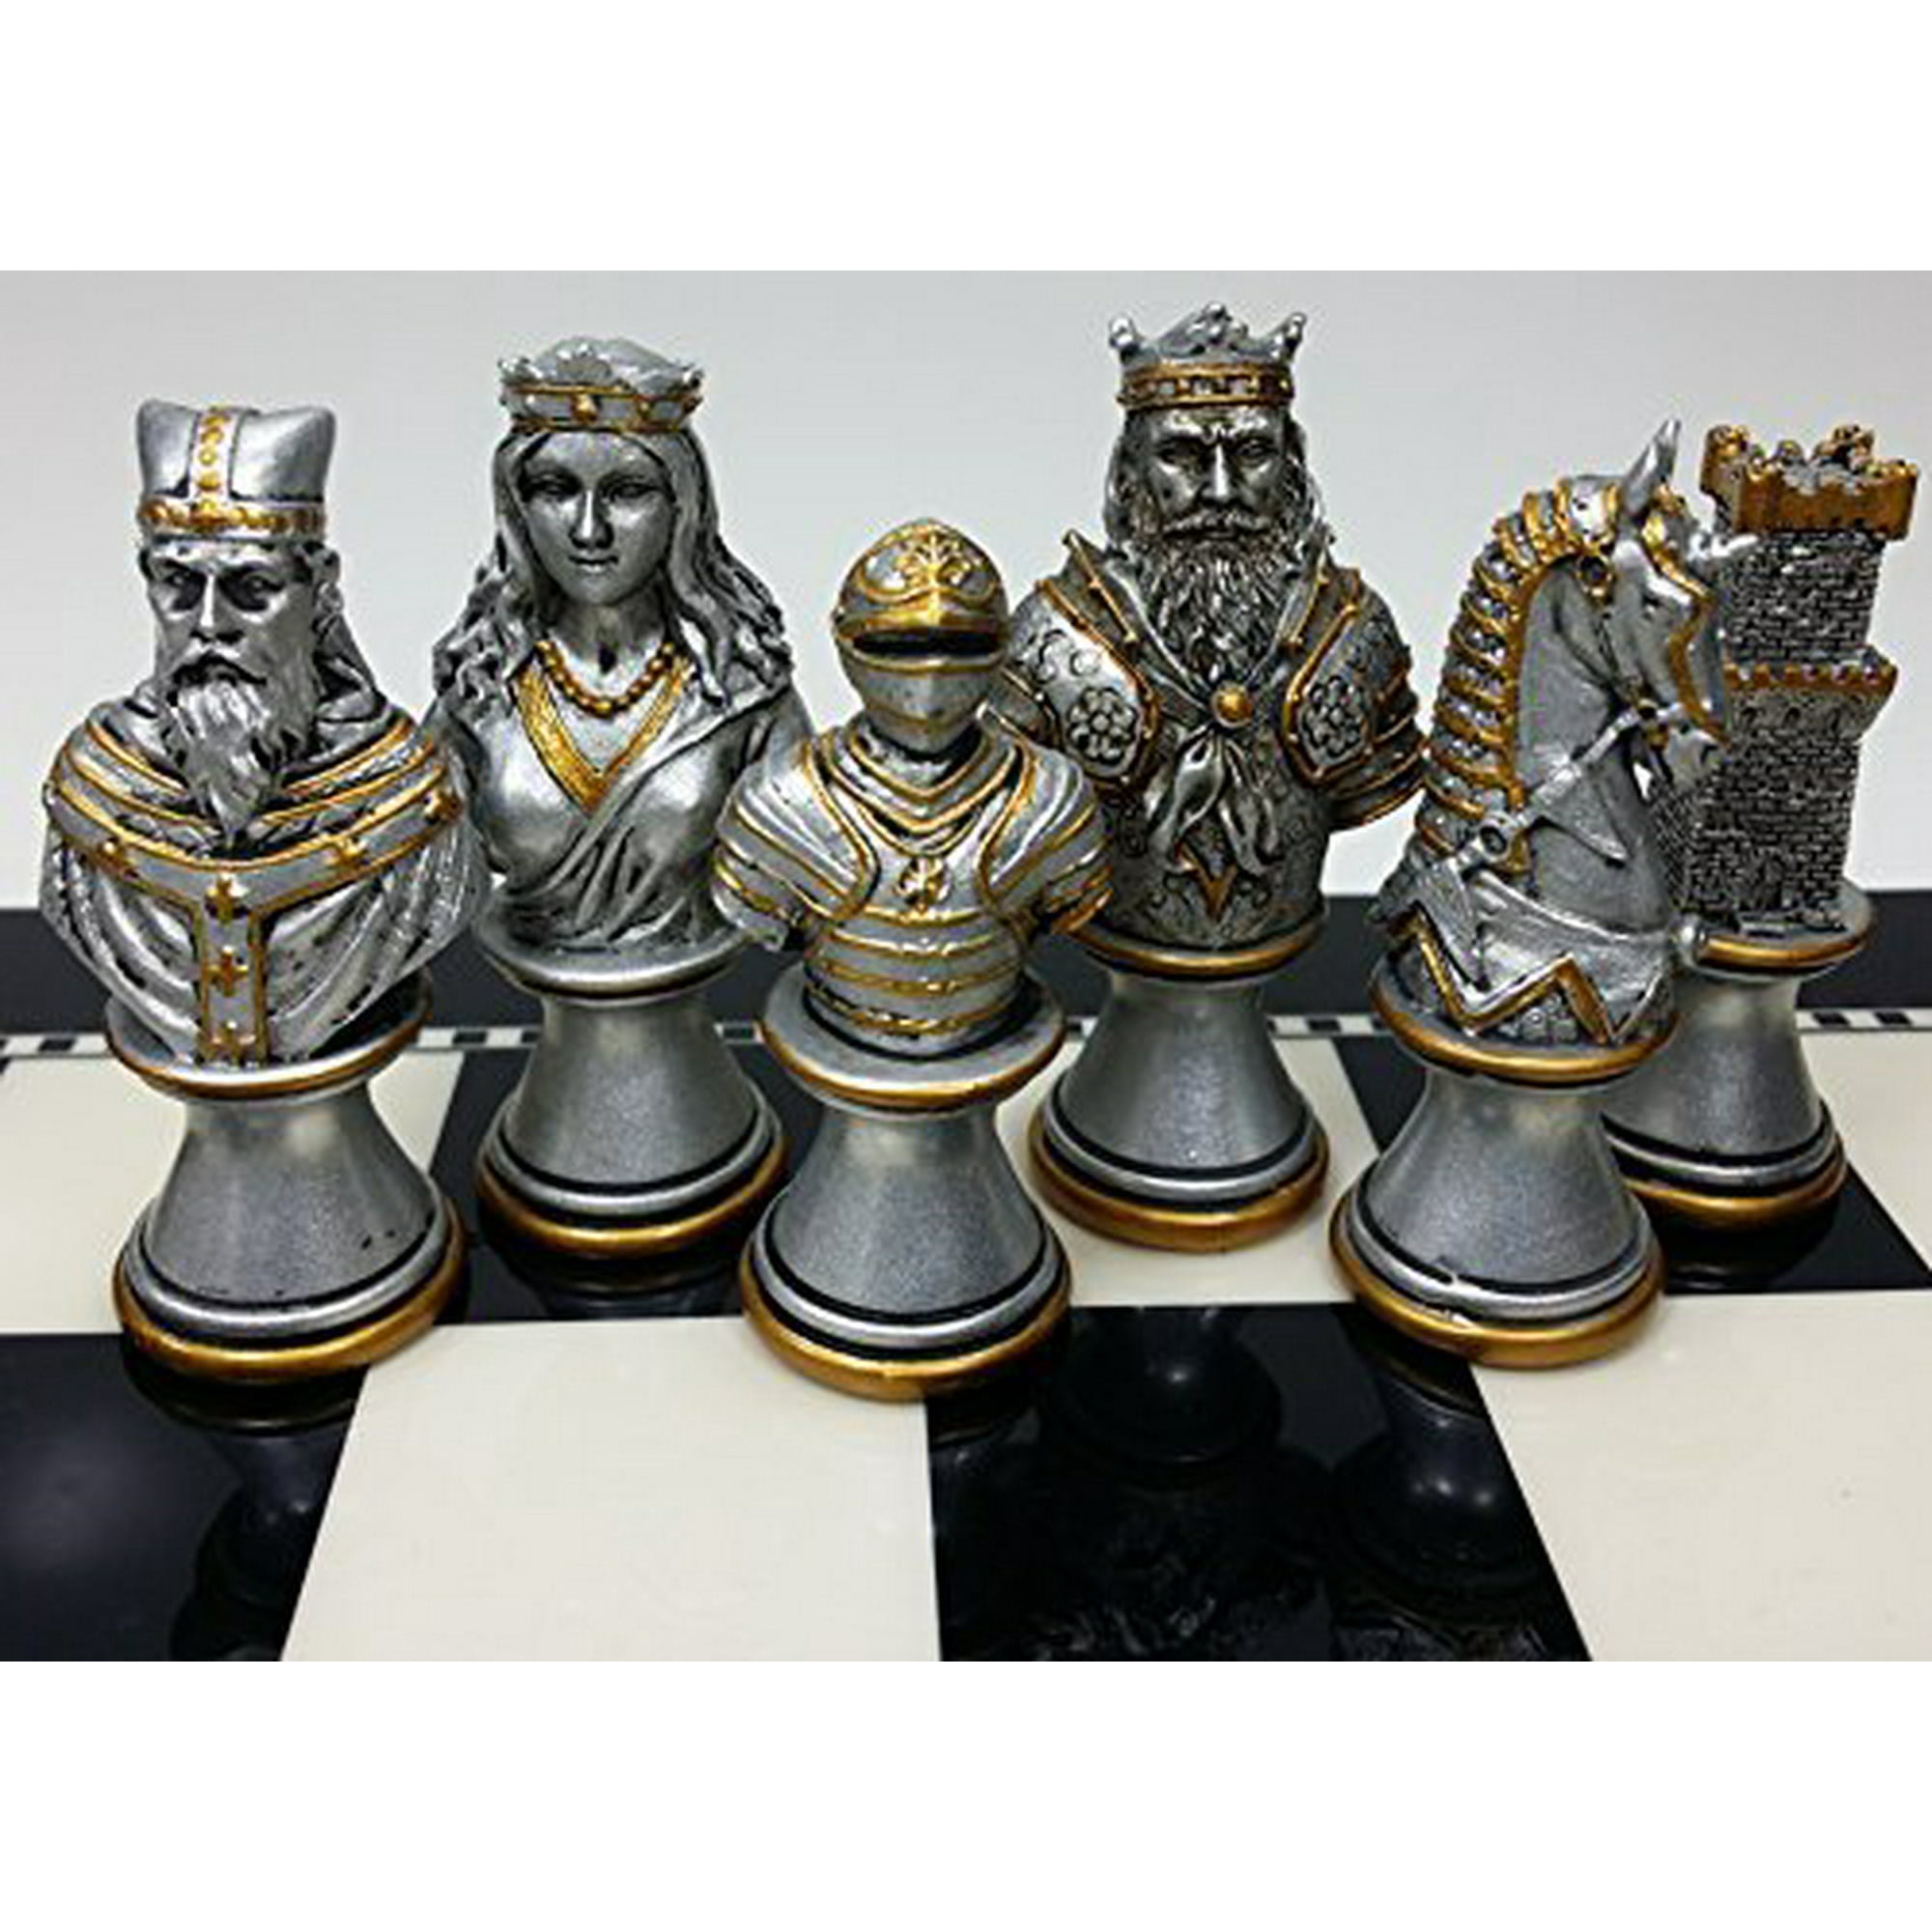 HPL Medieval Times Crusades Knight Chess Men Set Gold & Silver 